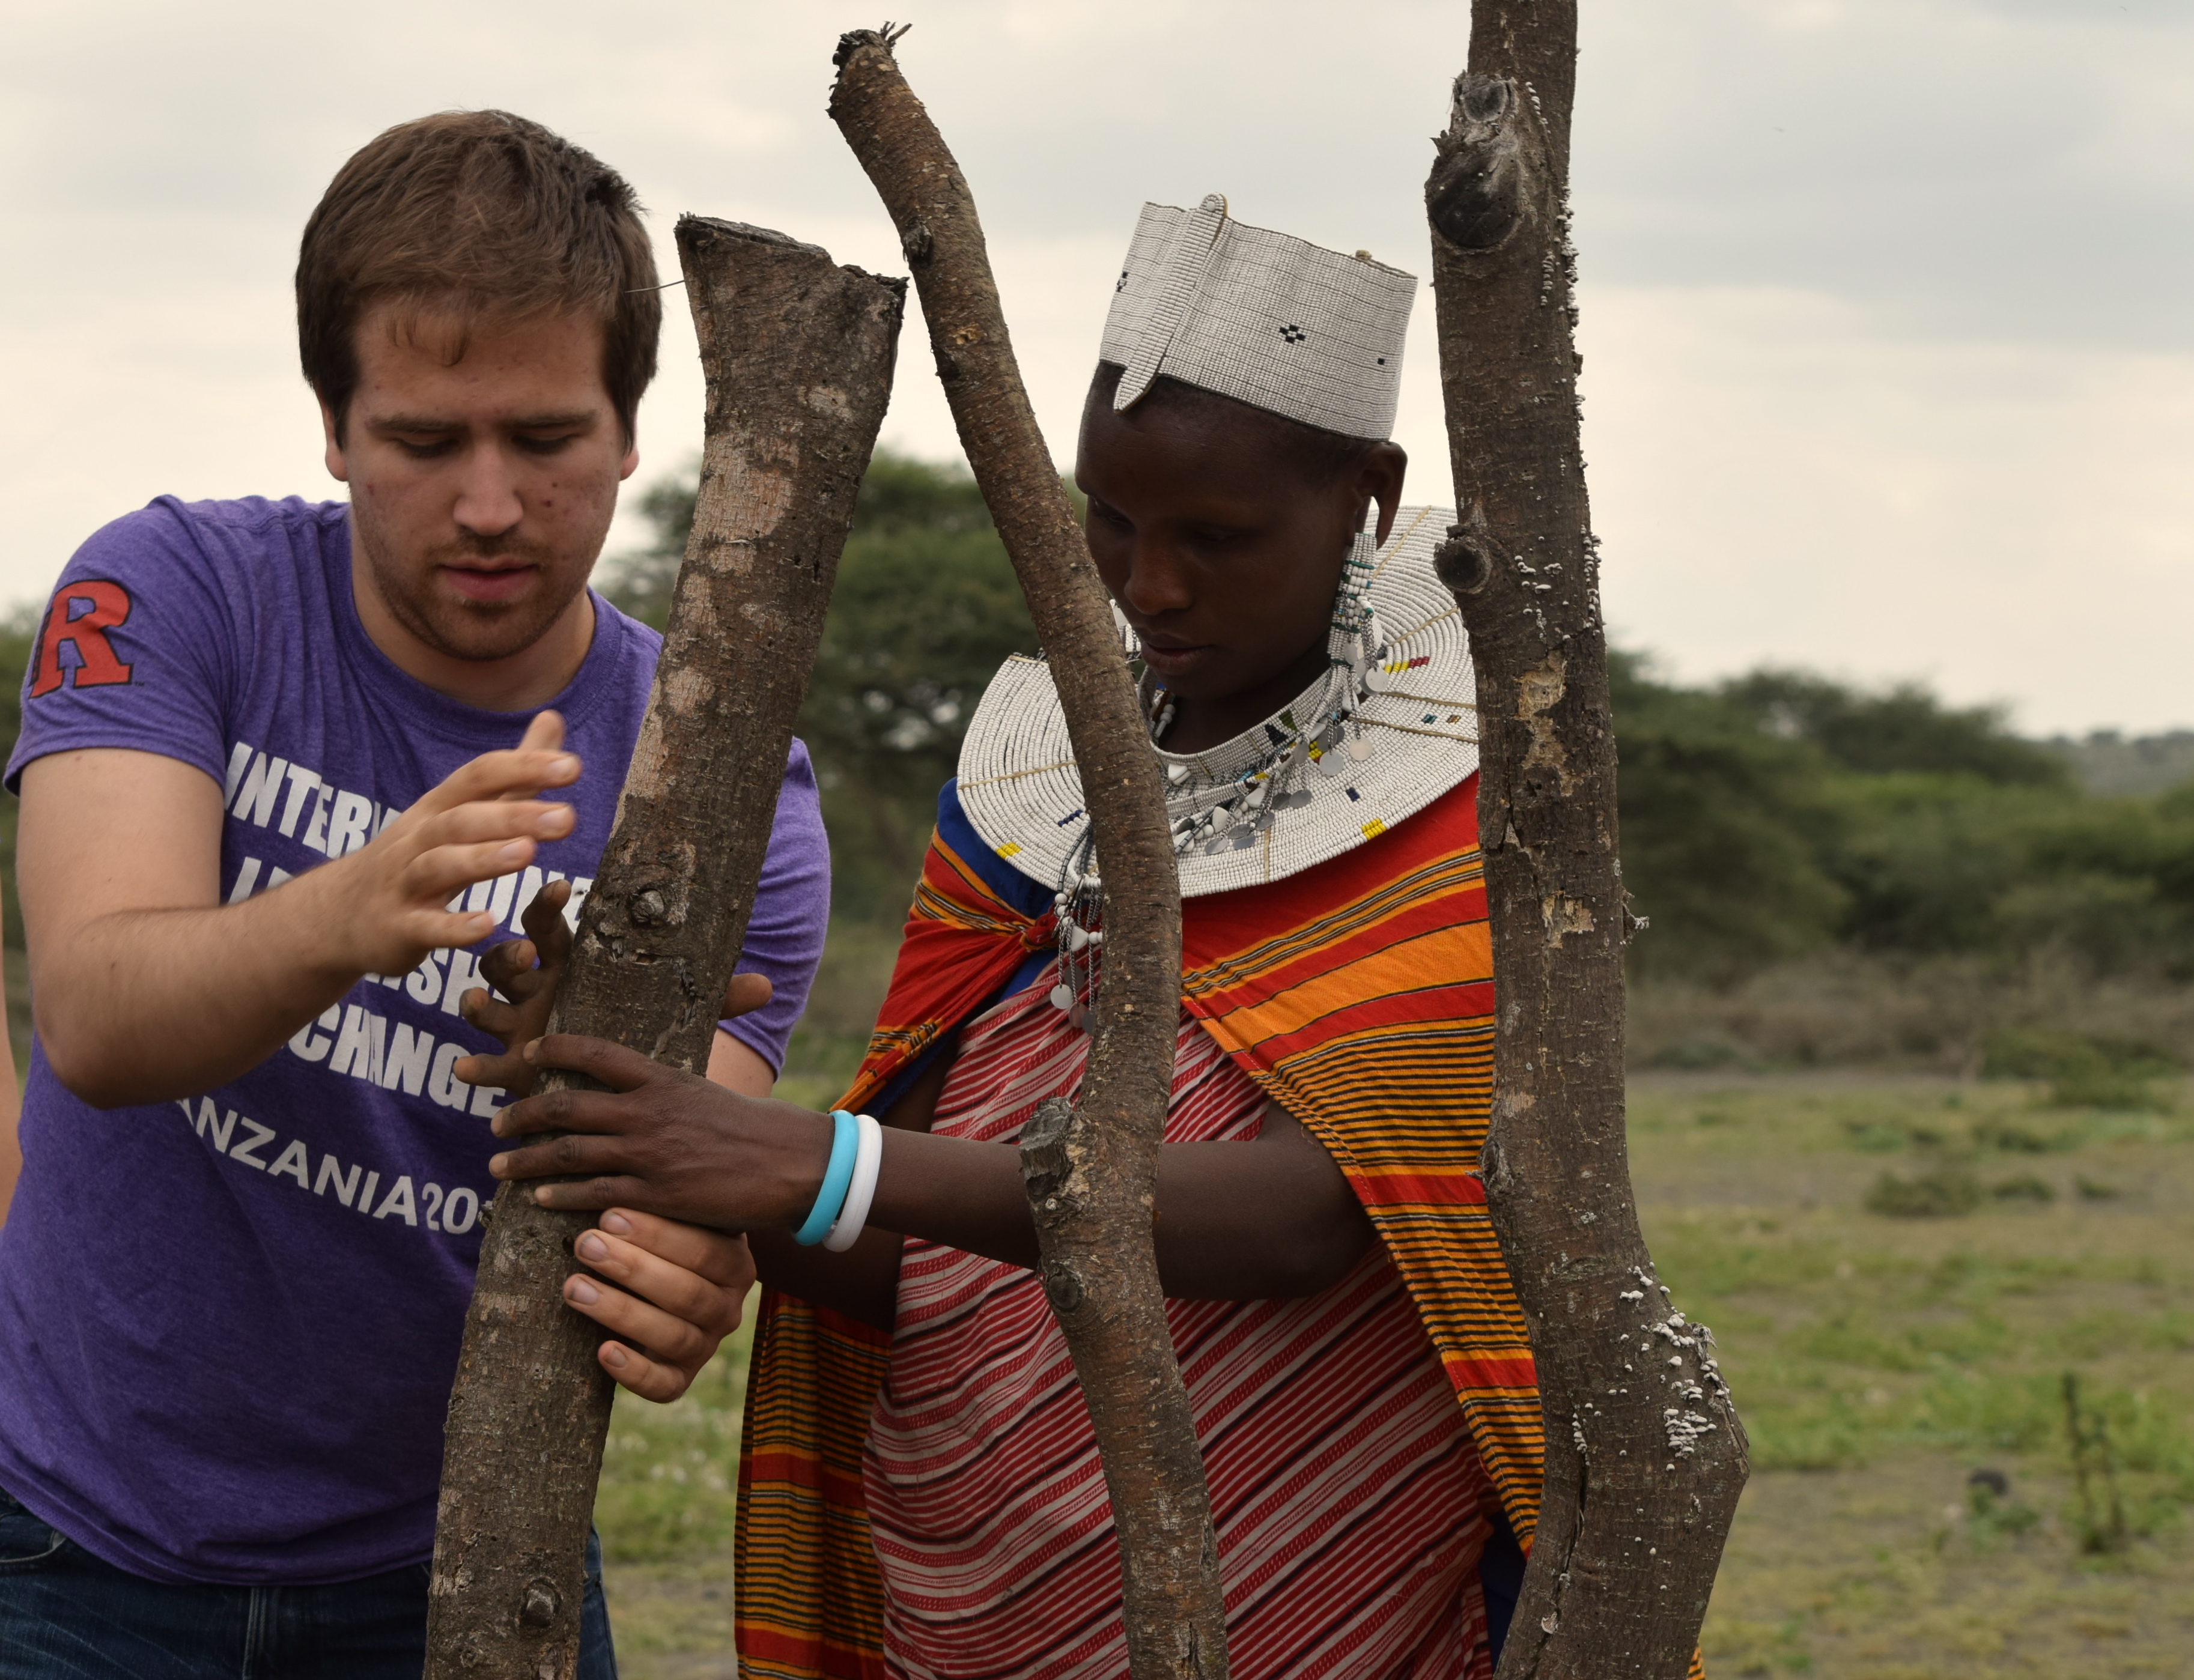 A Rutgers student aids a Tanzanian in their work